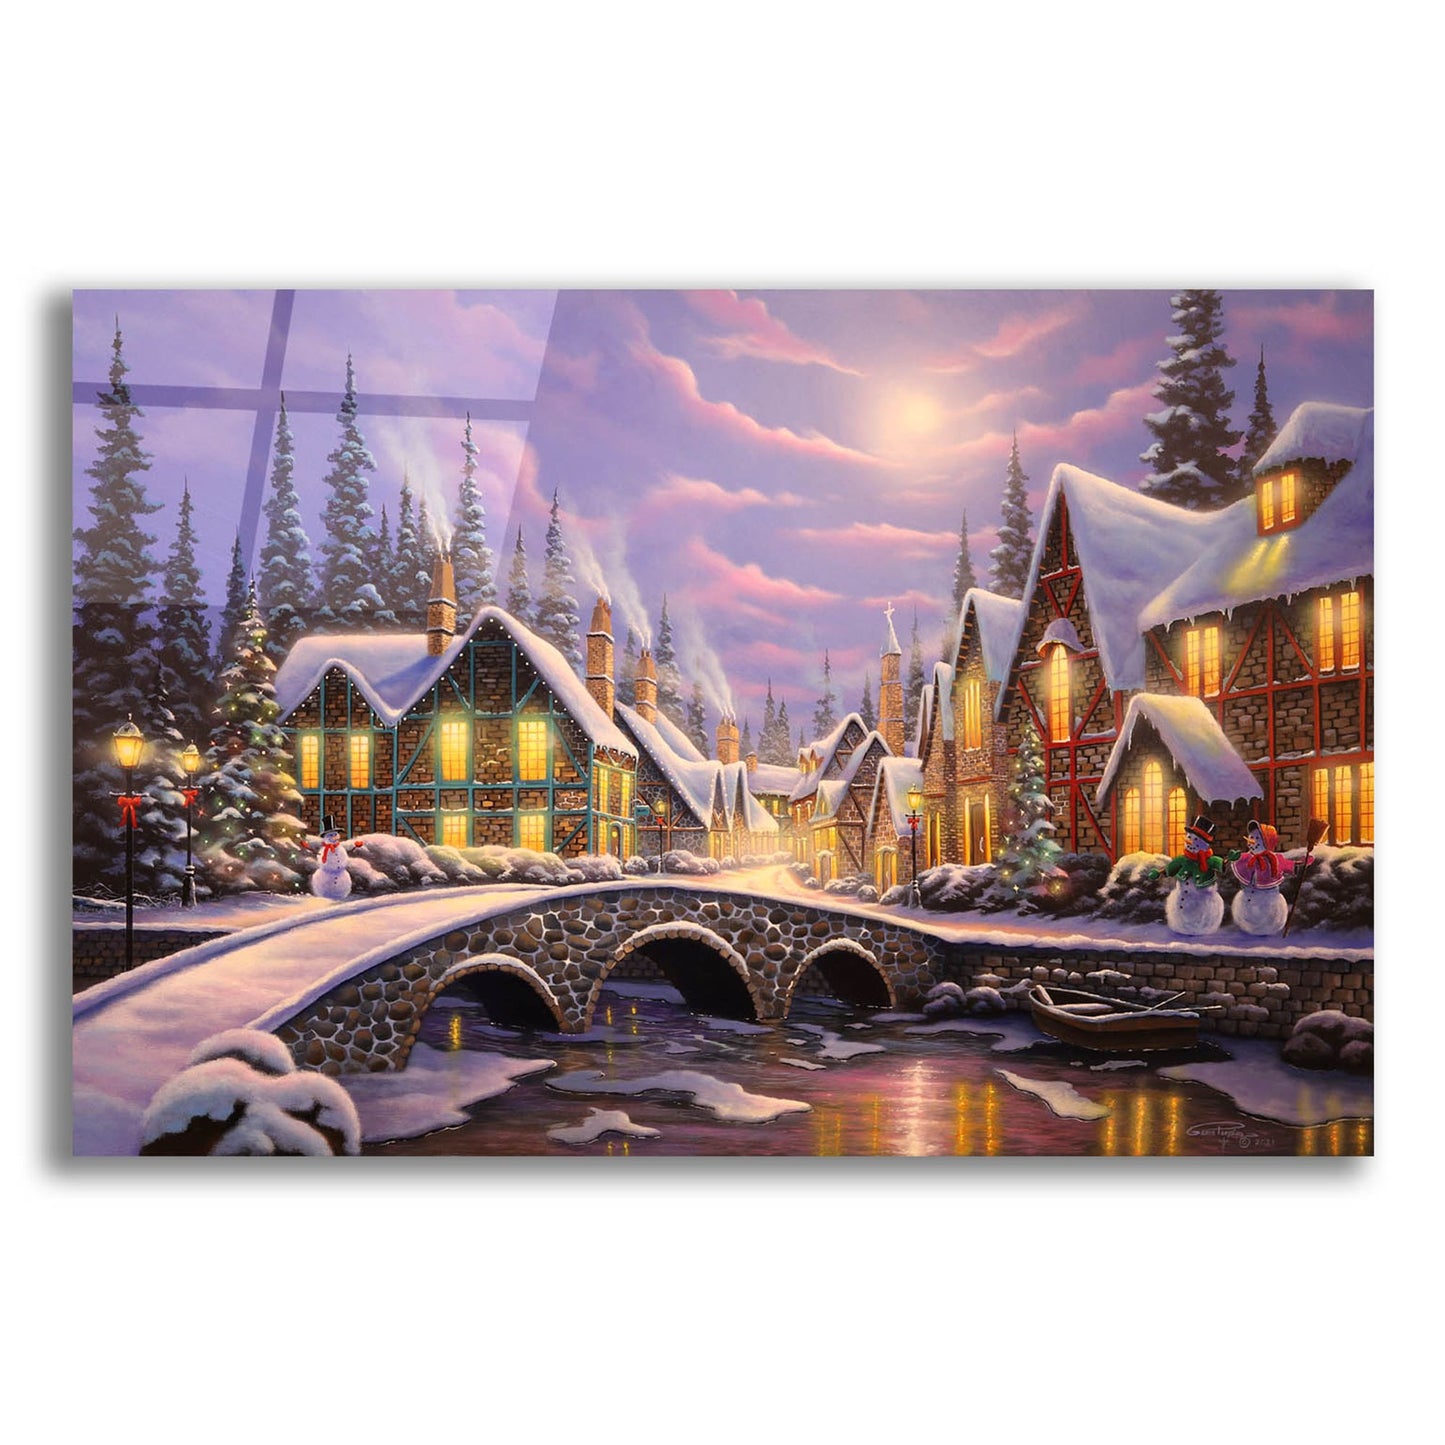 Epic Art 'A Snowy Christmas' by Geno Peoples, Acrylic Glass Wall Art,24x16